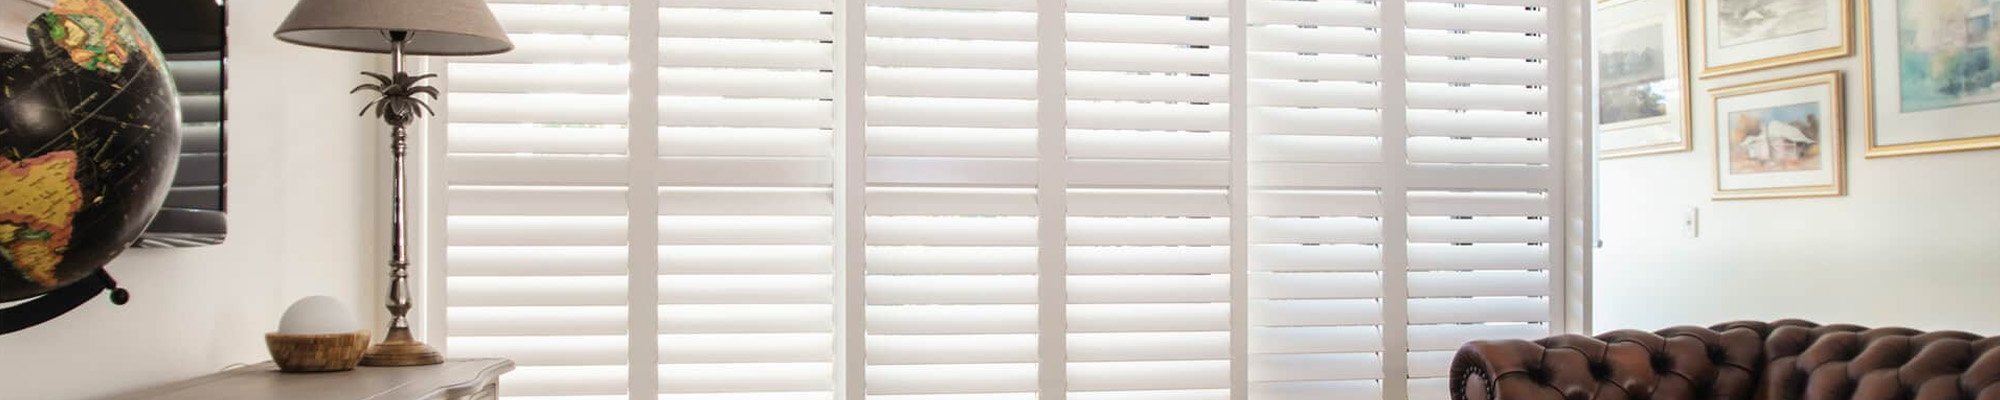 Norman shutters, blinds and shades - Solutions Floors